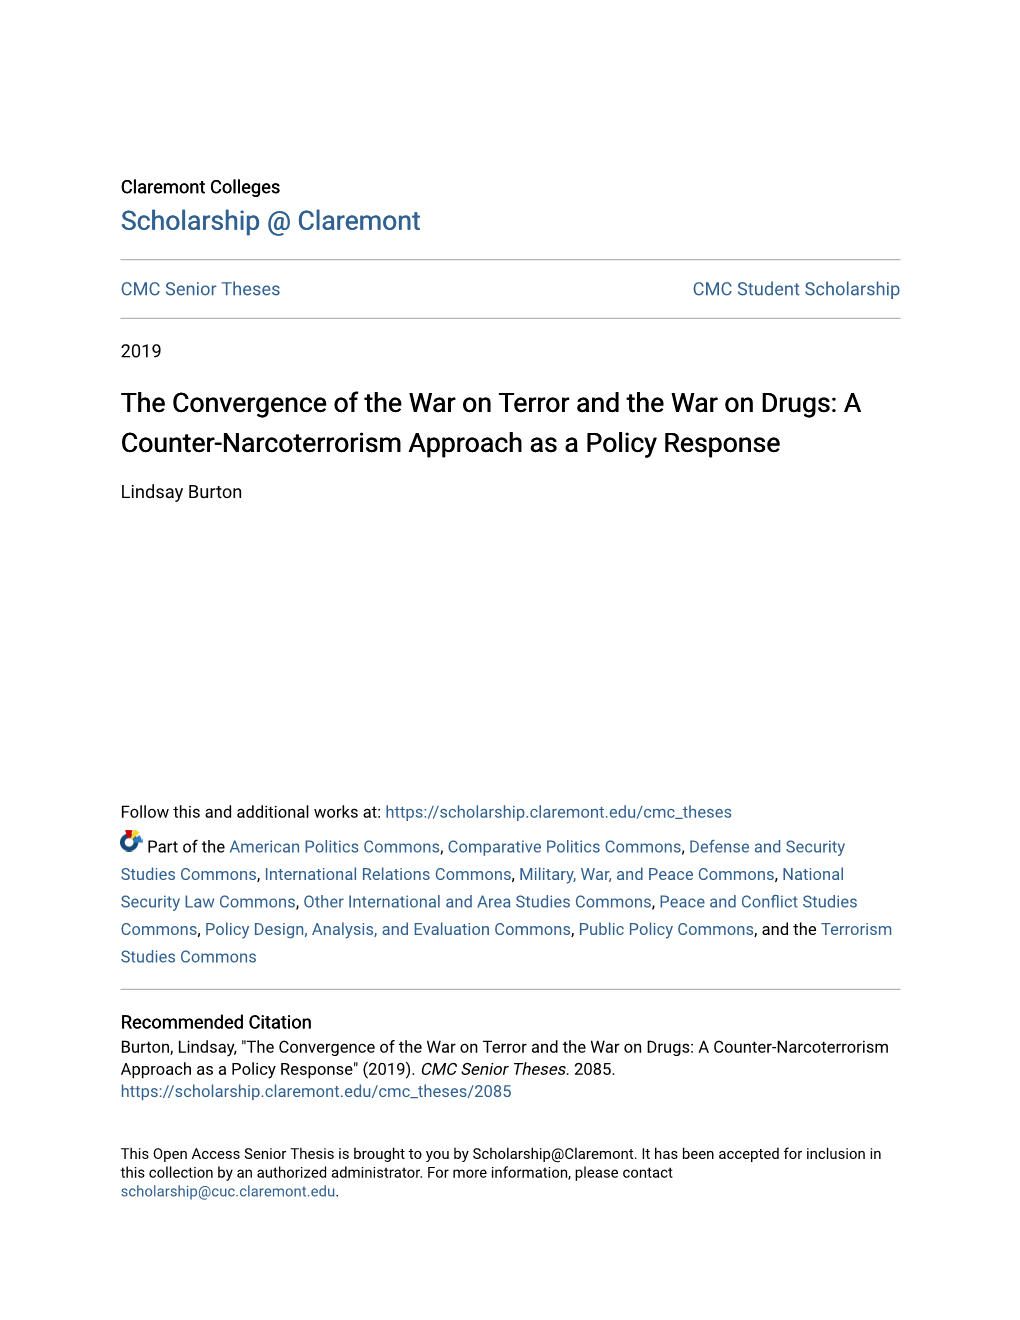 The Convergence of the War on Terror and the War on Drugs: a Counter-Narcoterrorism Approach As a Policy Response